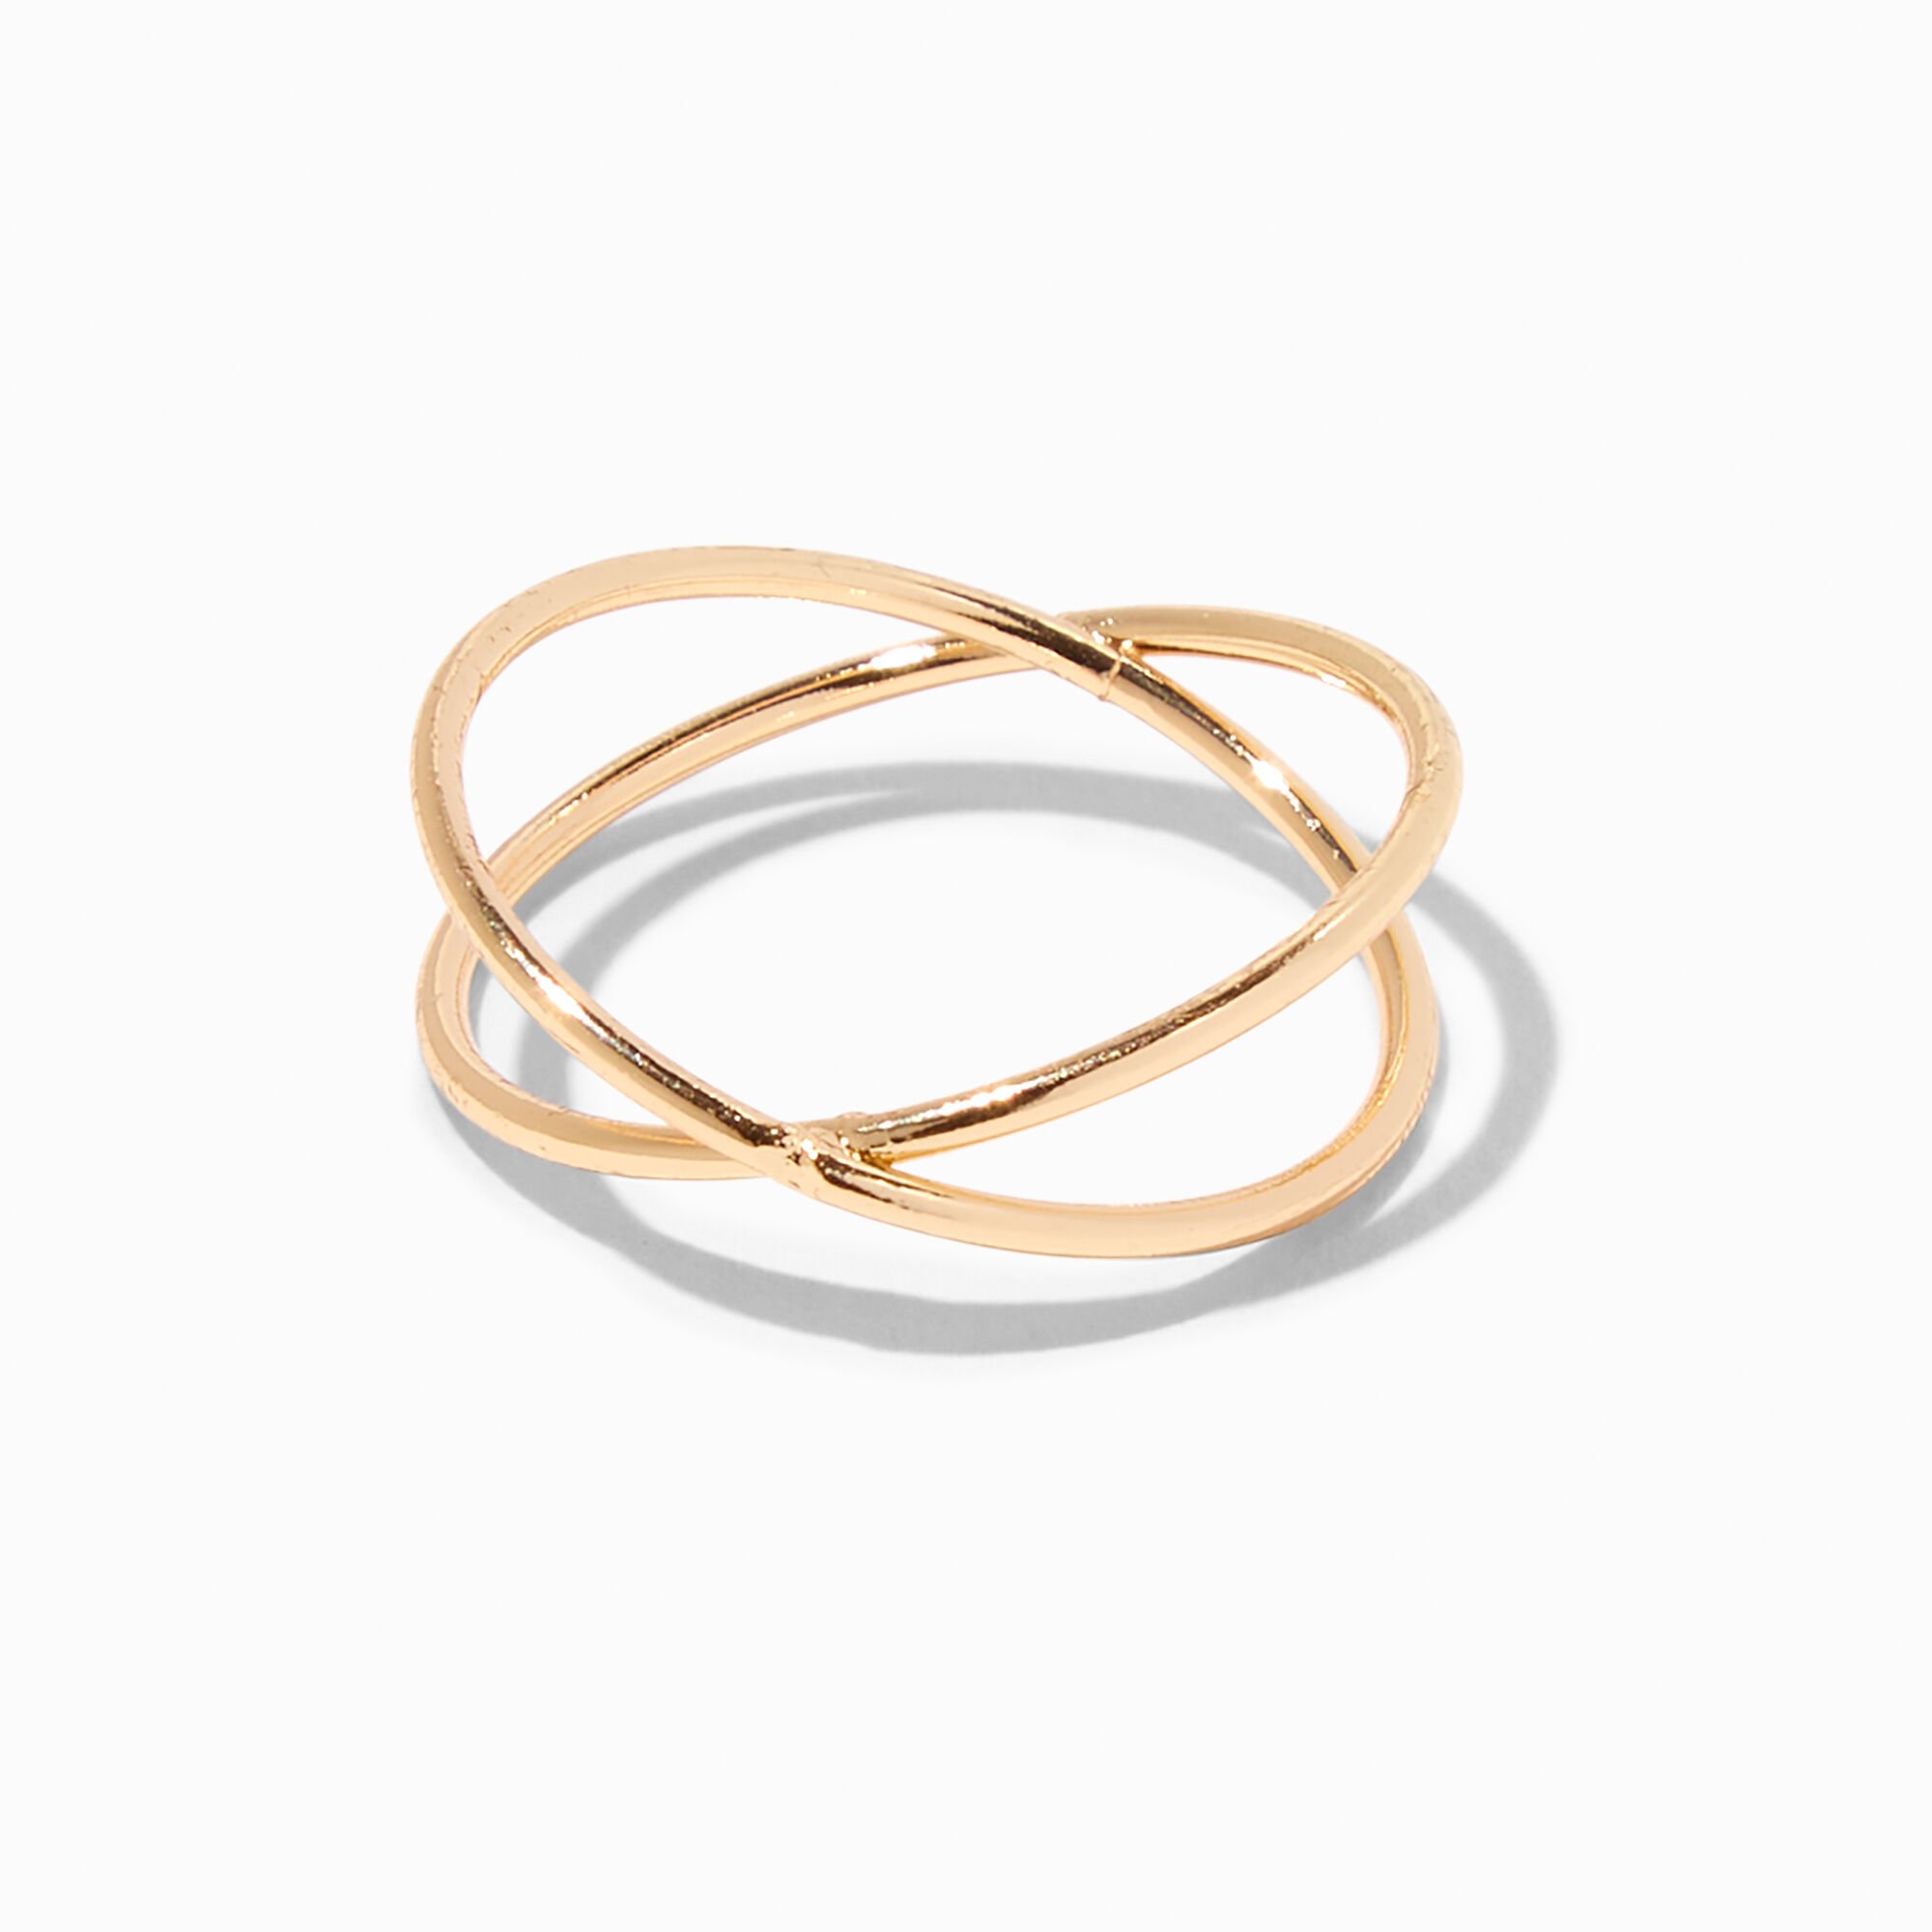 View Claires Criss Cross Ring Gold information